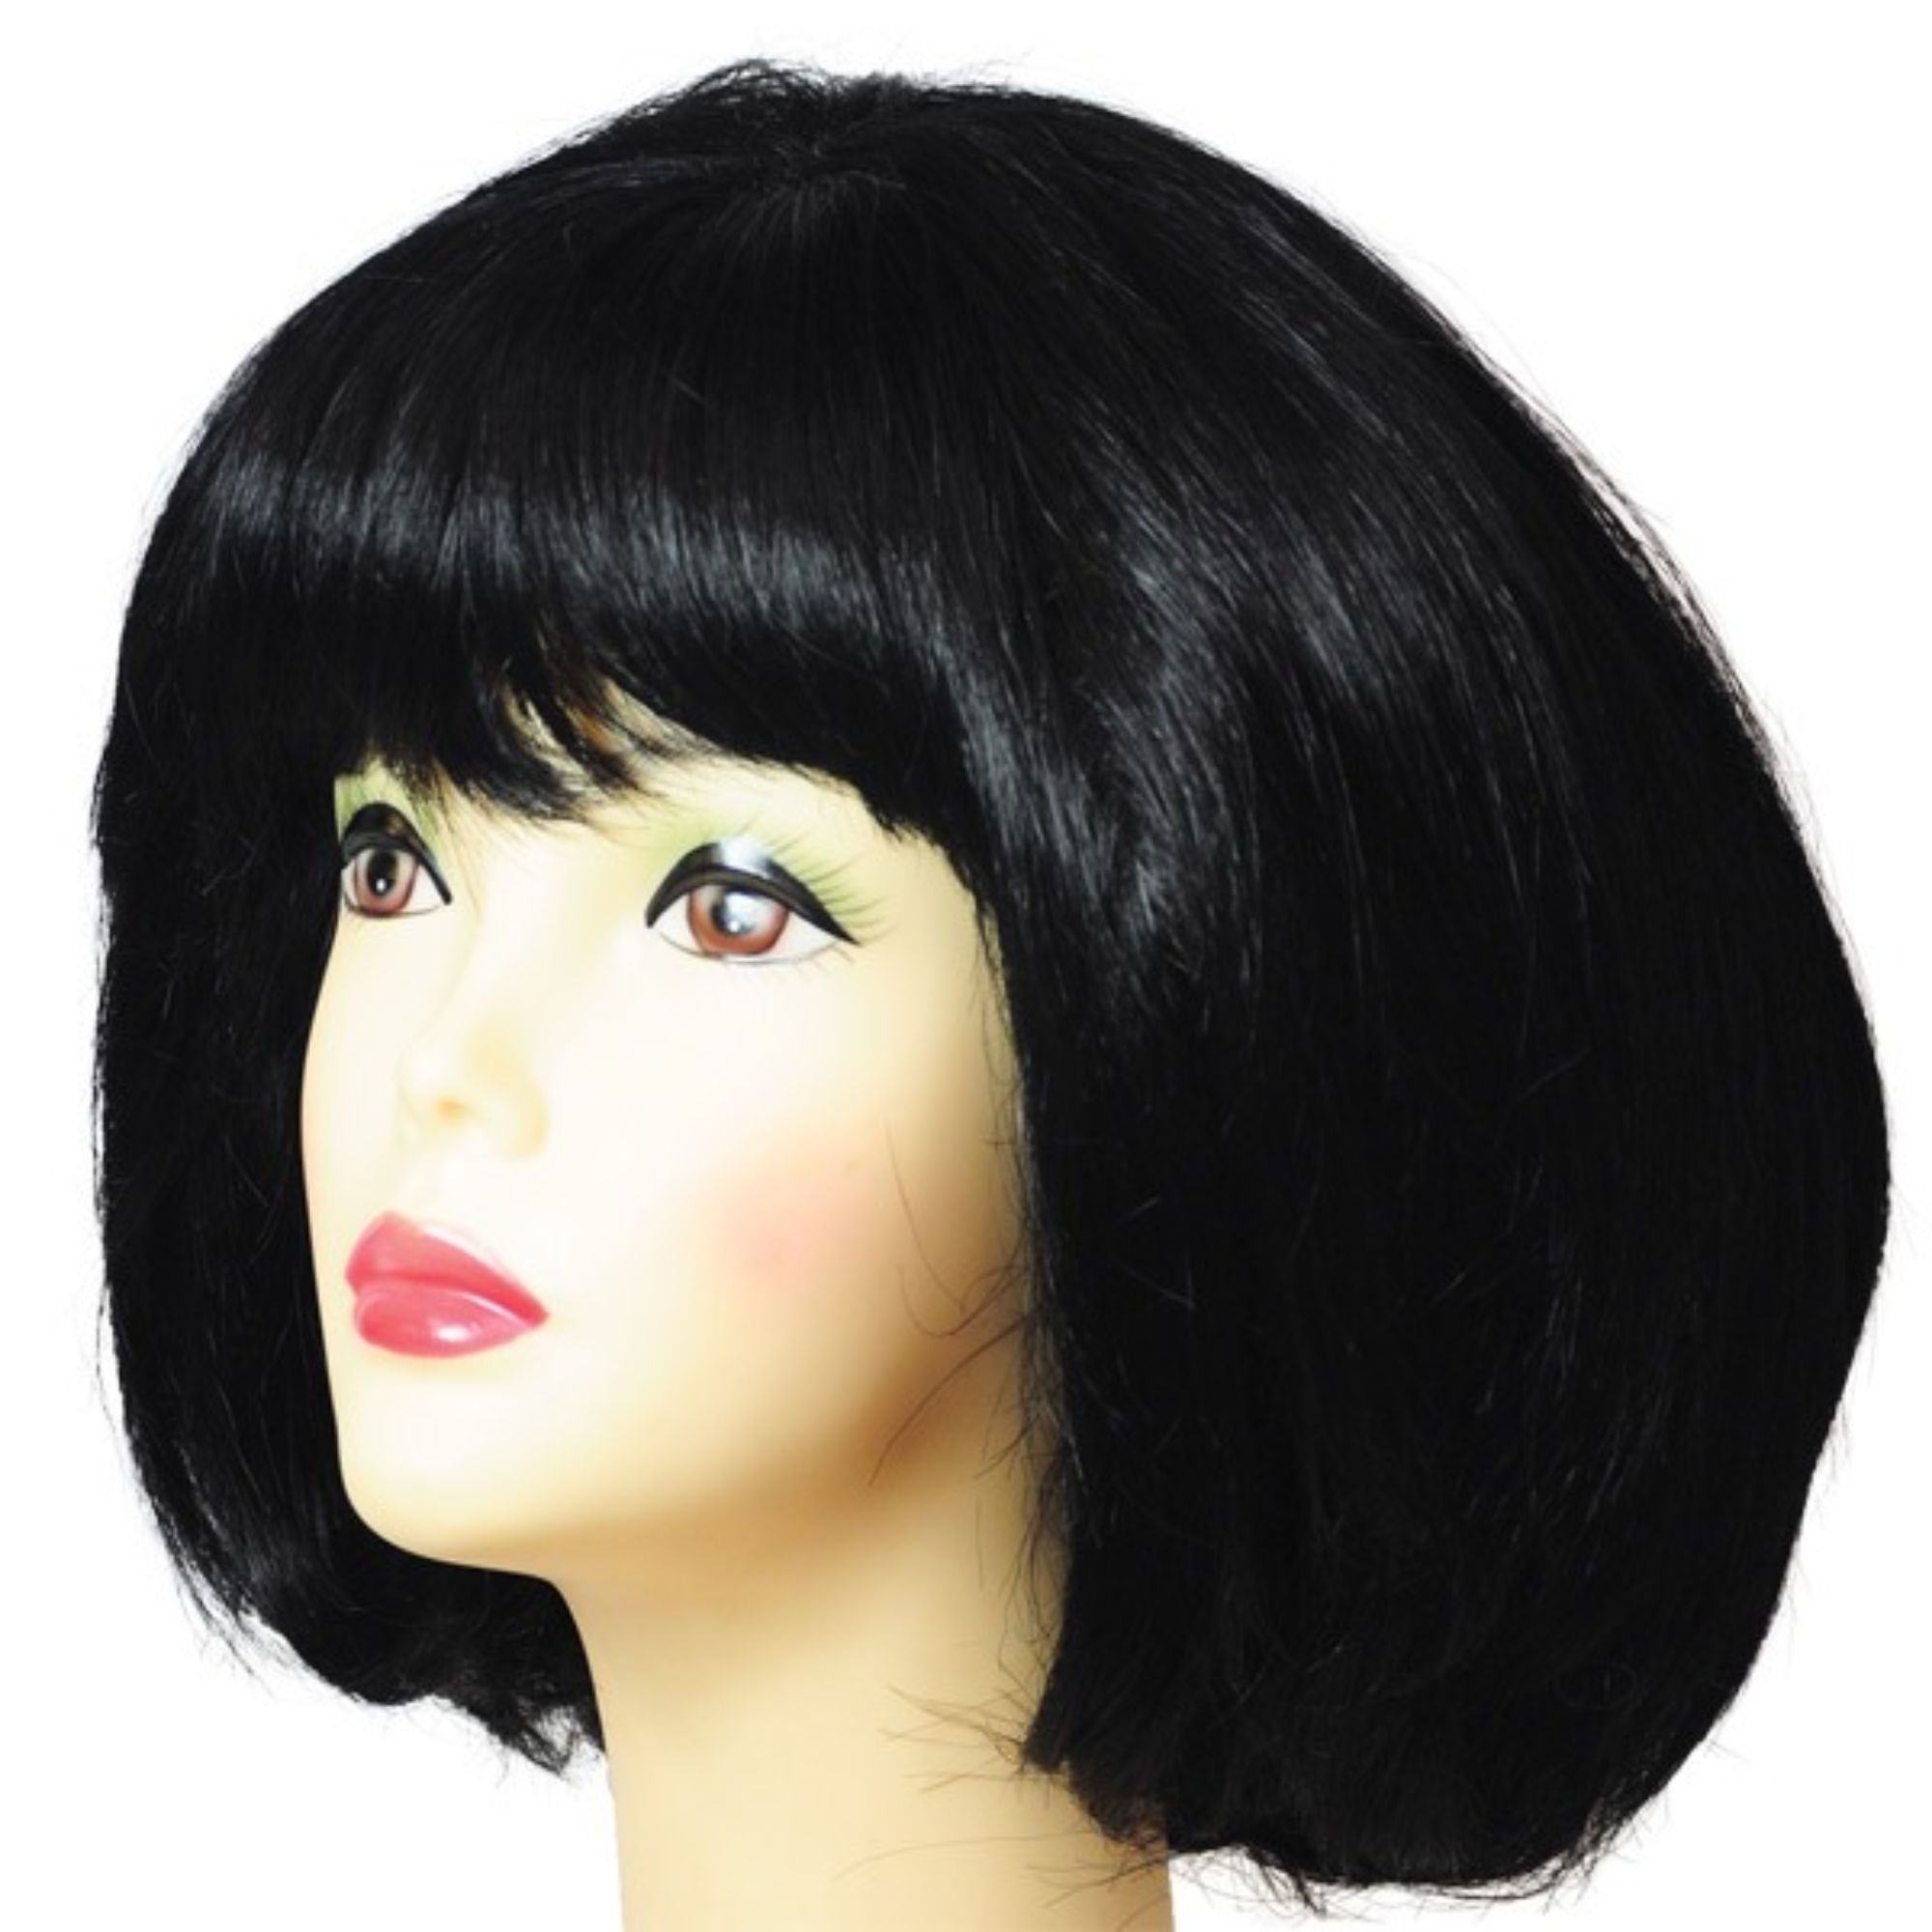 The Costume Center Black Women Adult Halloween Wig Costume Accessory - One Size